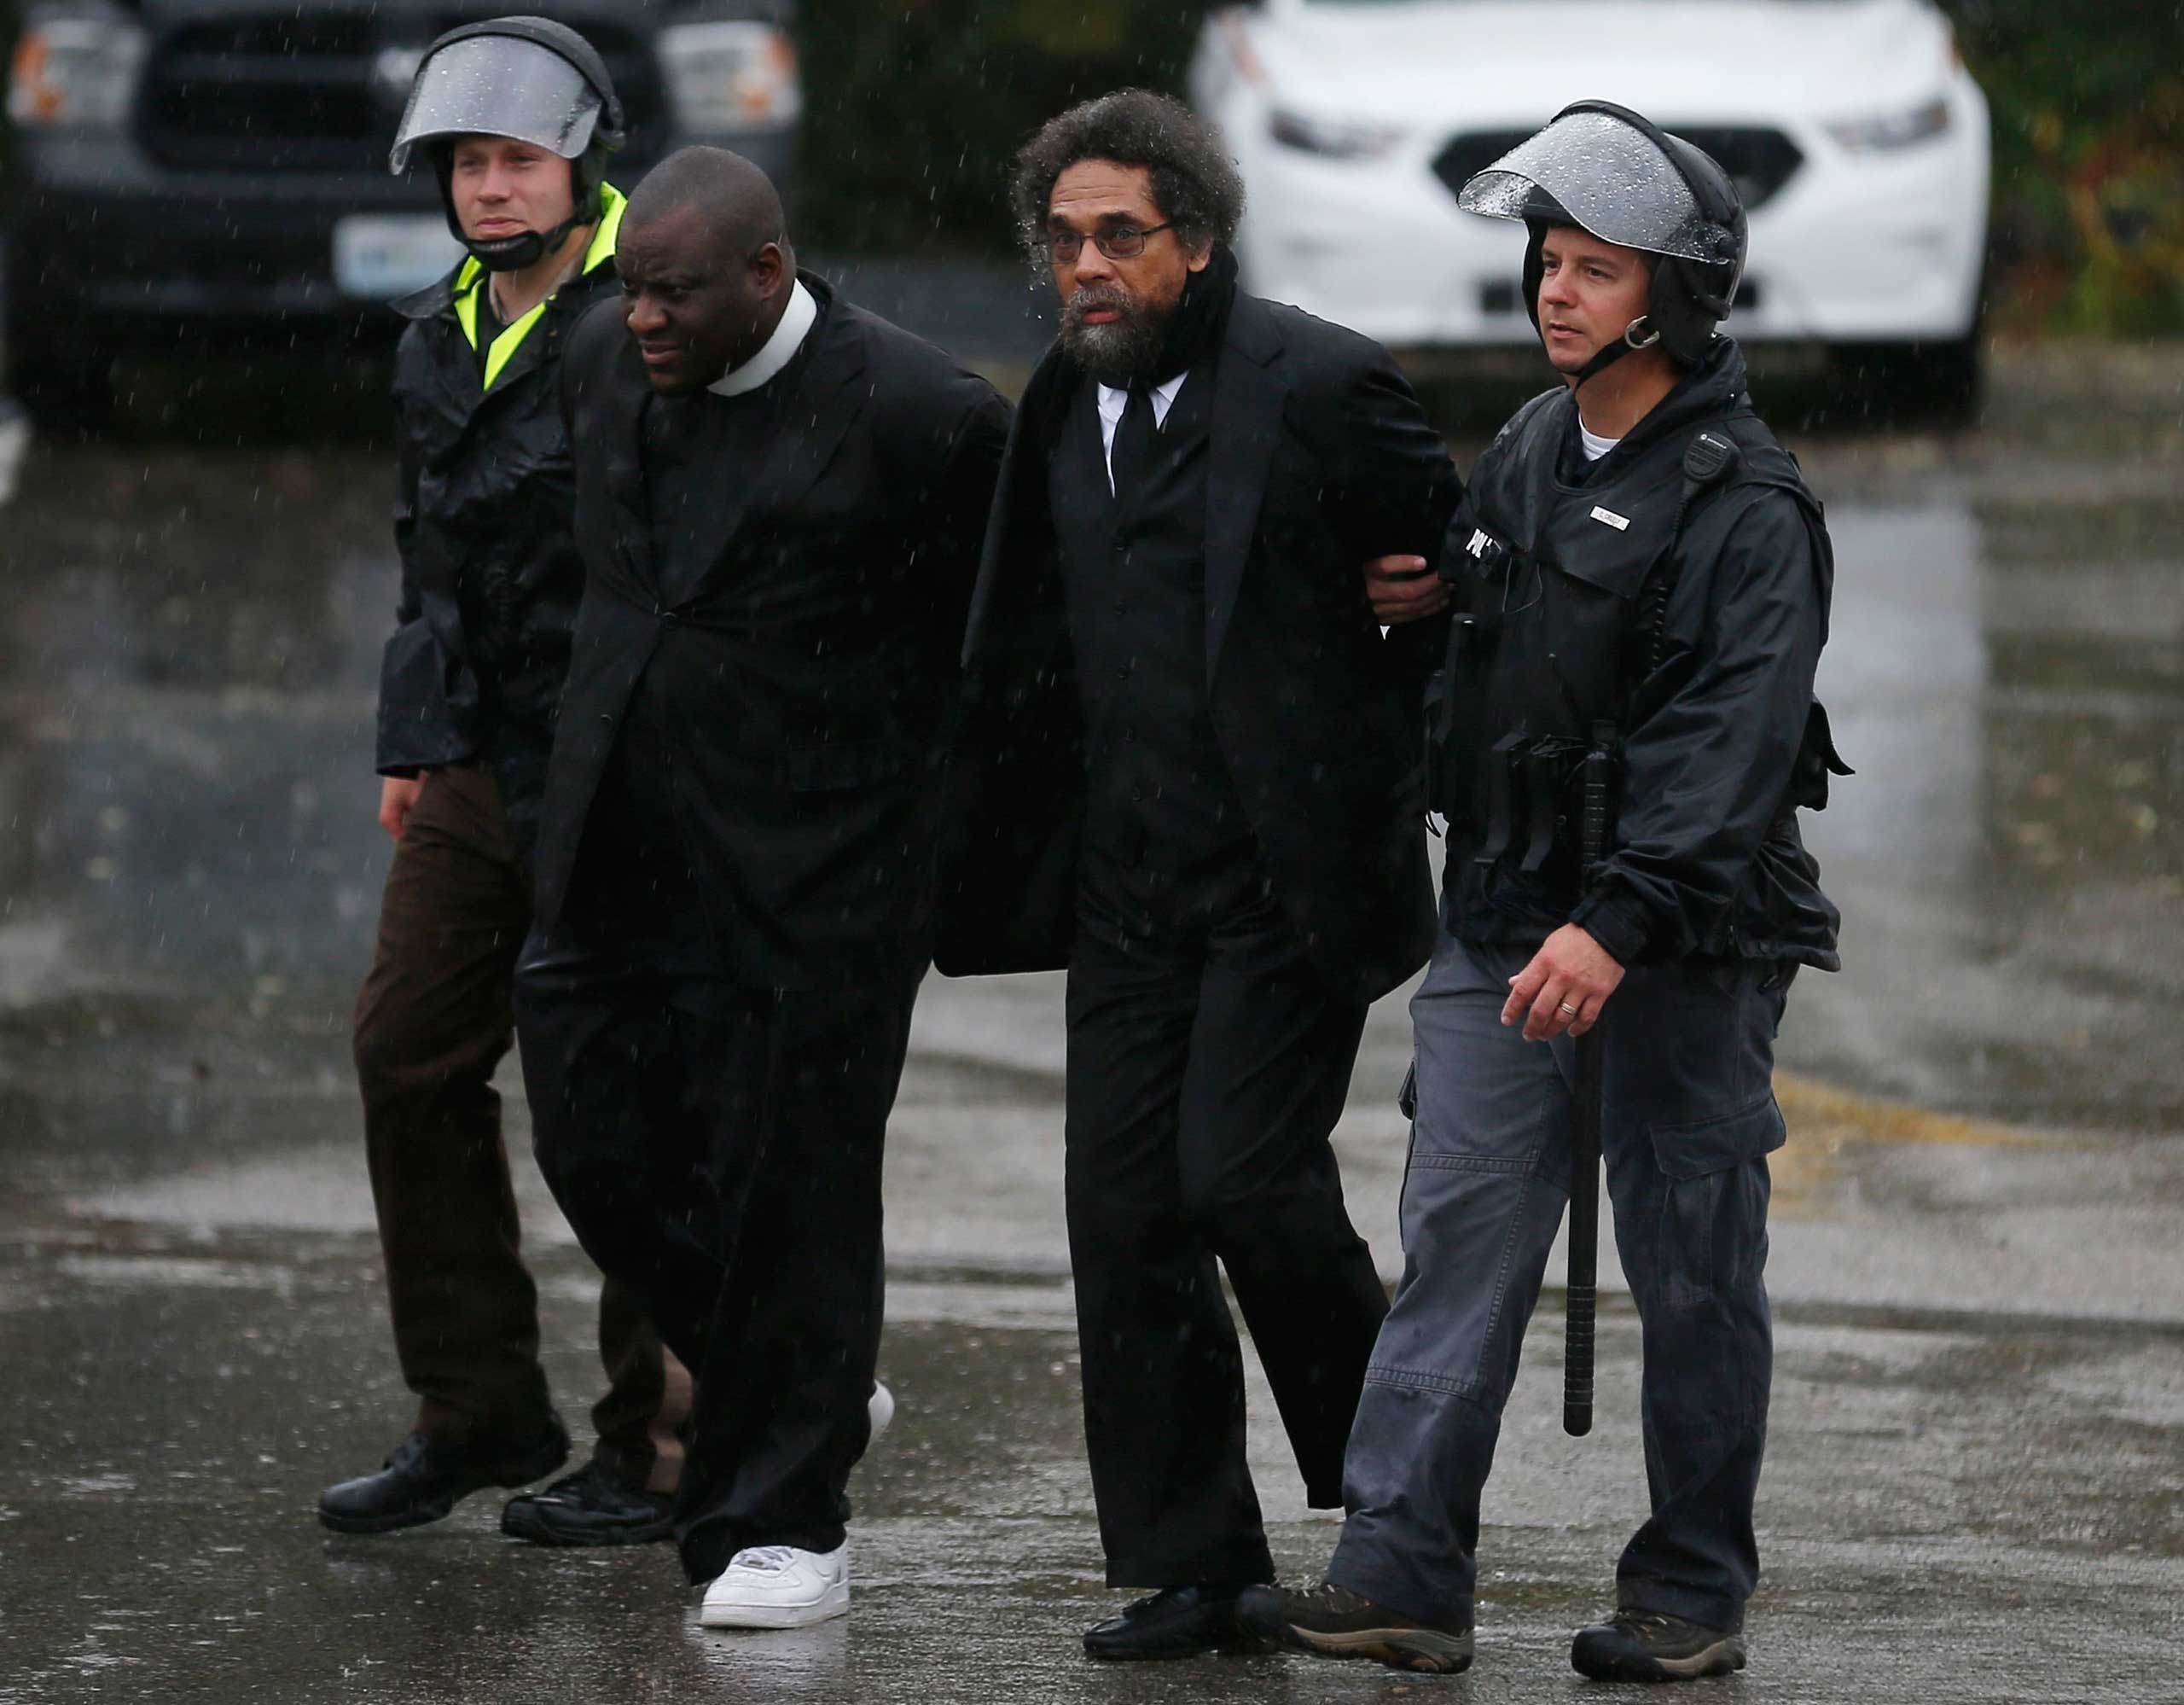 Activist Cornel West is detained by police during a protest at the Ferguson Police Department in Ferguson